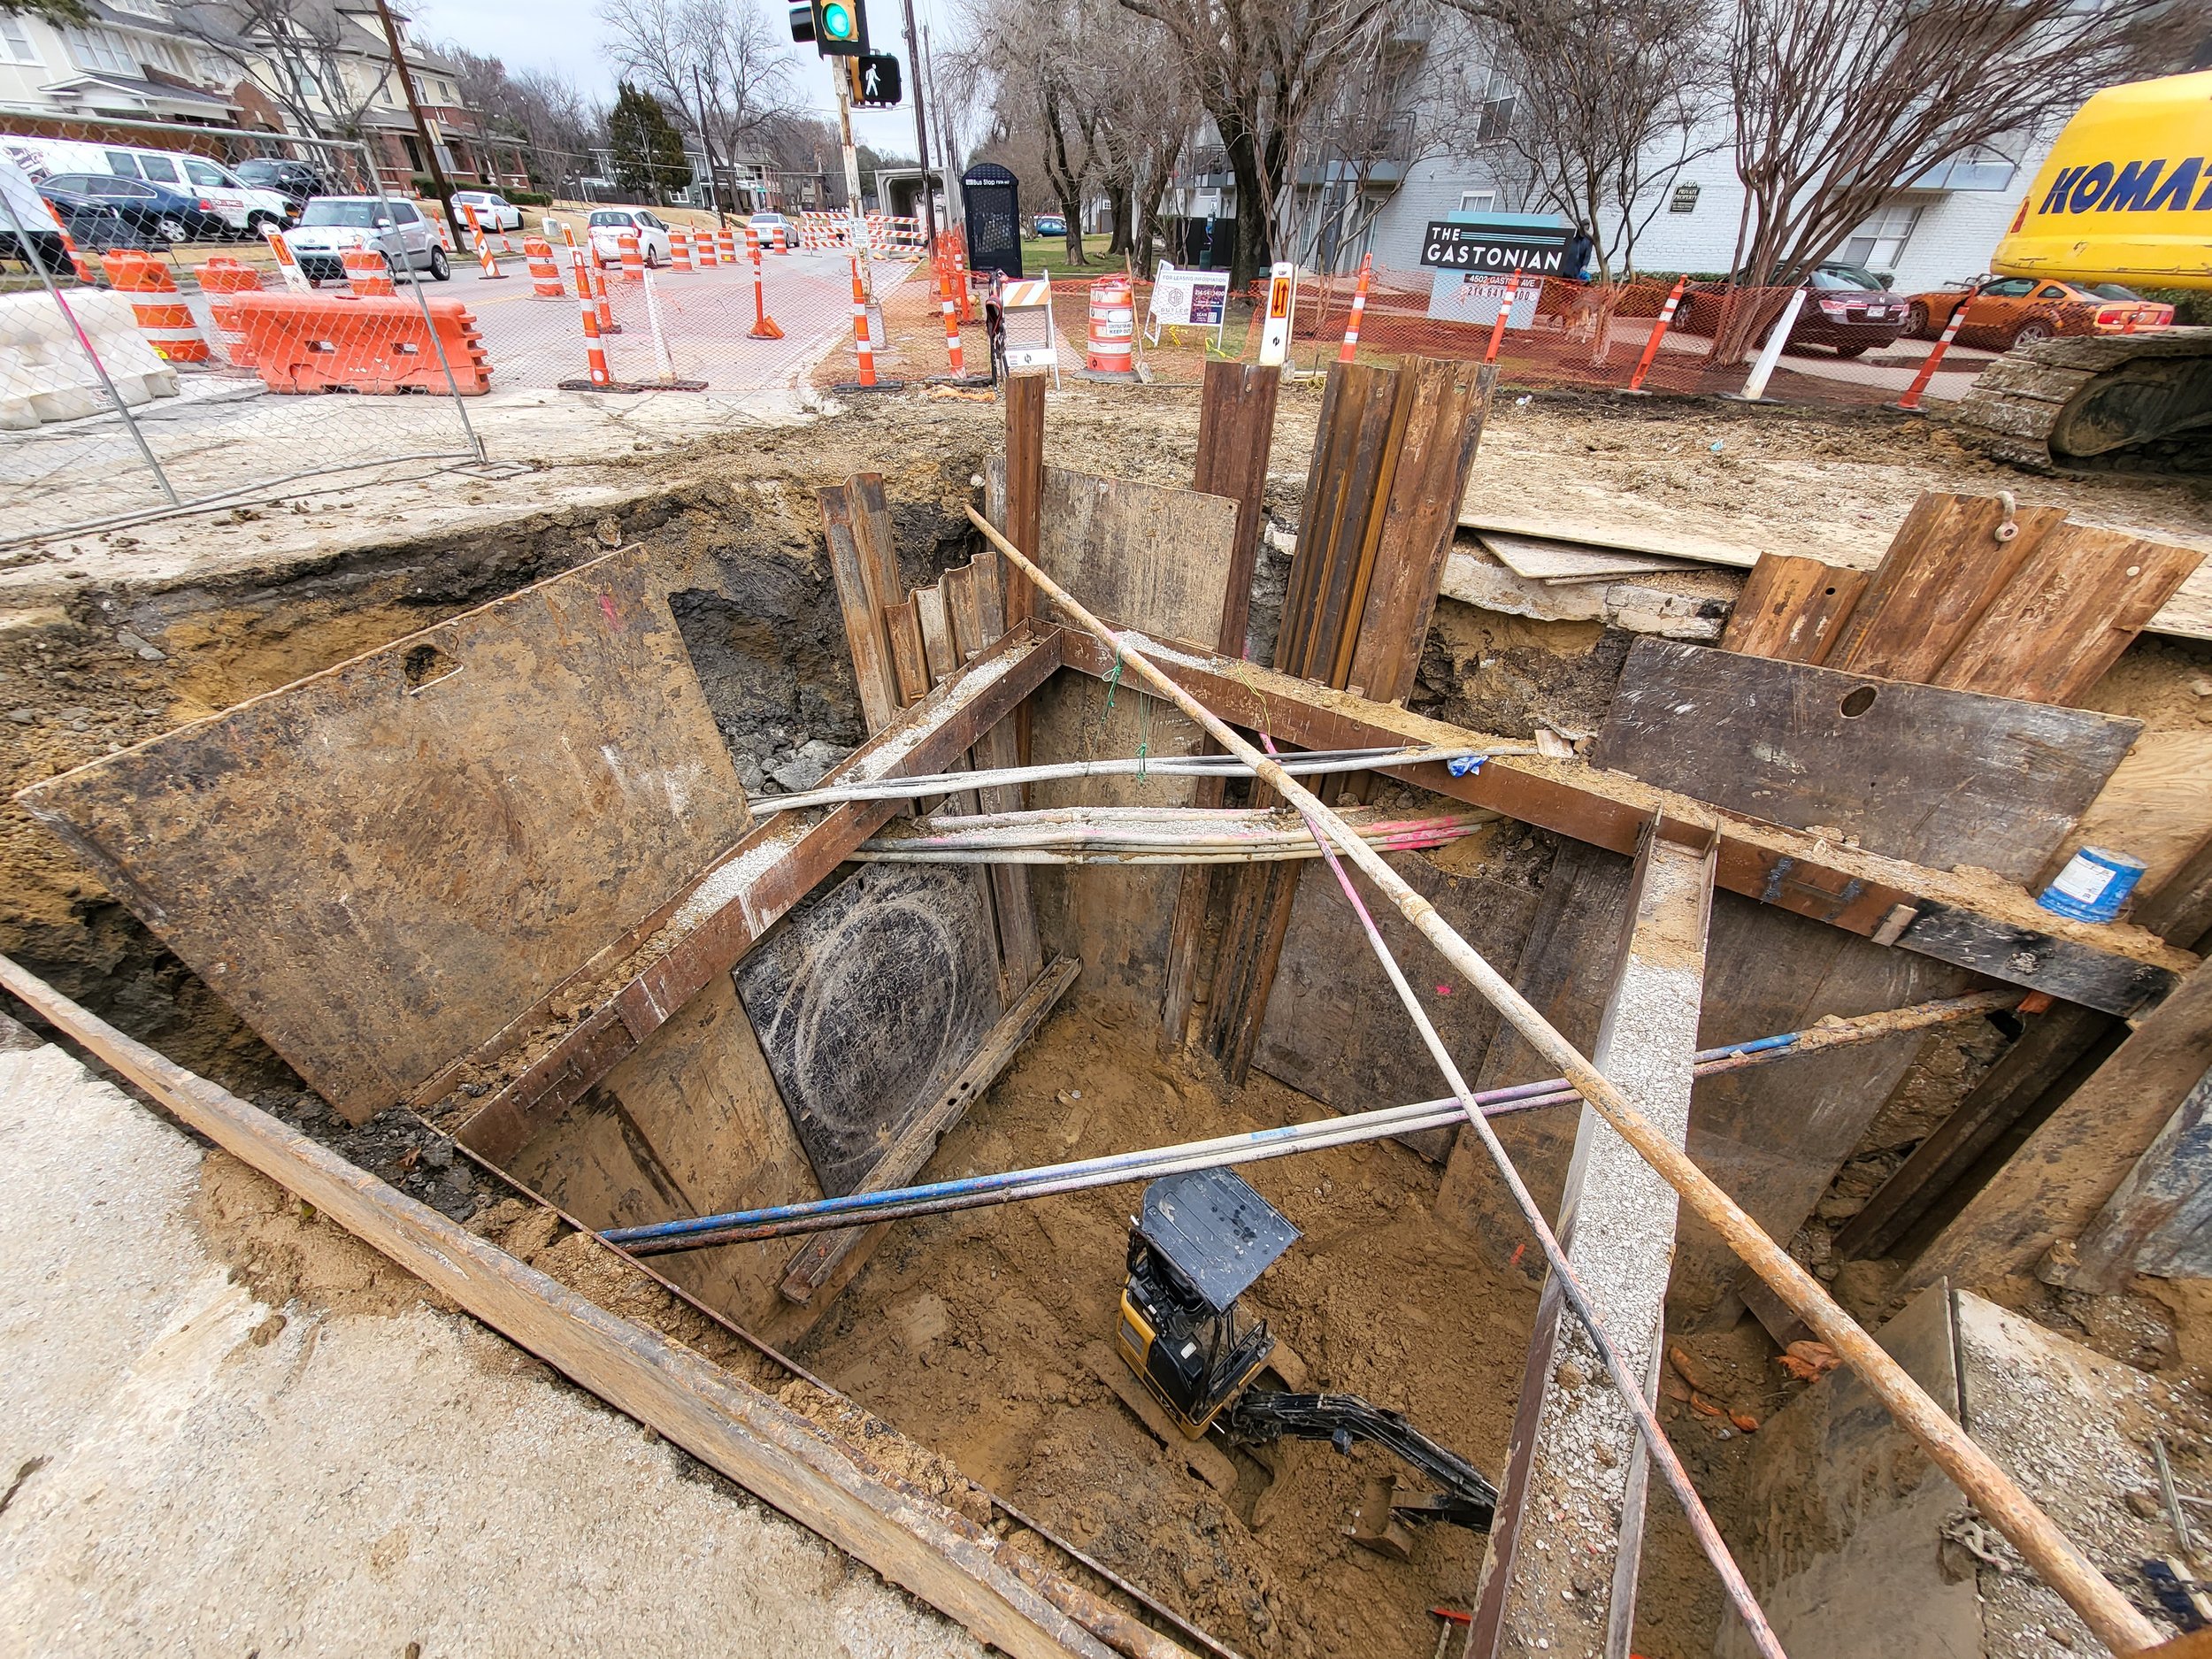 February 2022 - Excavation for Stormwater Line installation in Gaston Avenue and N. Carroll Avenue intersection